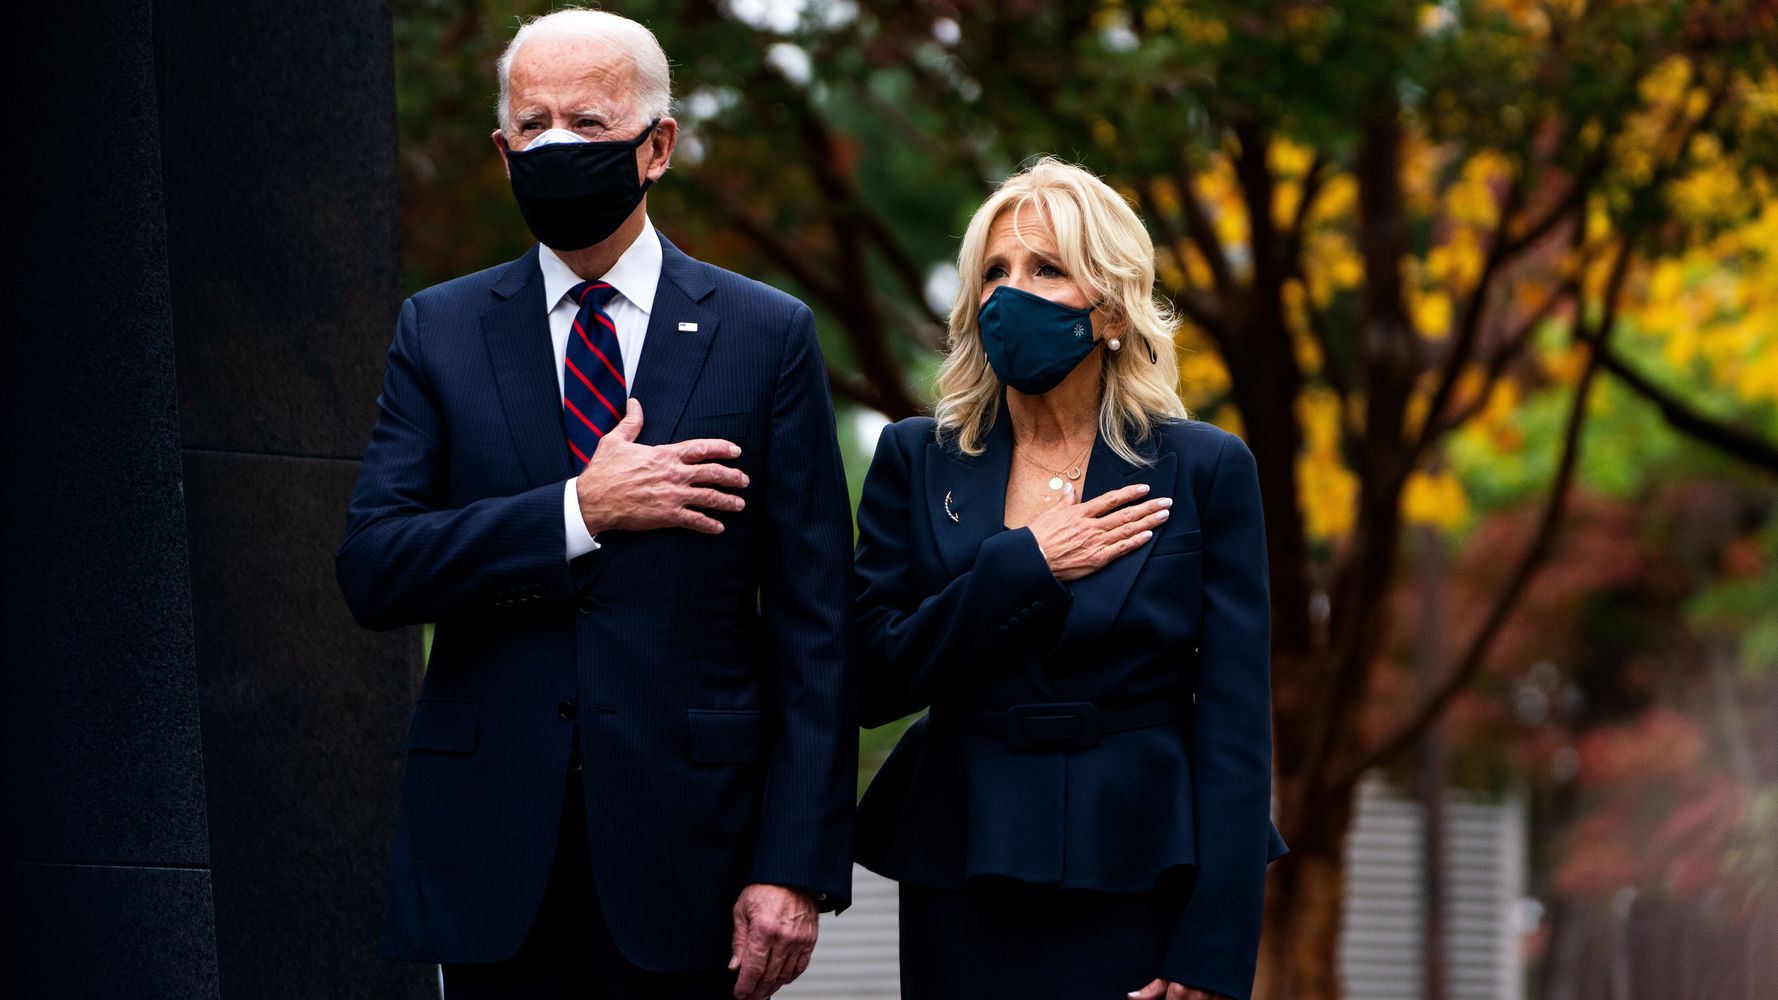 Joe And Jill Biden's Thanksgiving Op-Ed: 'We’re Going To Get Through This Together'